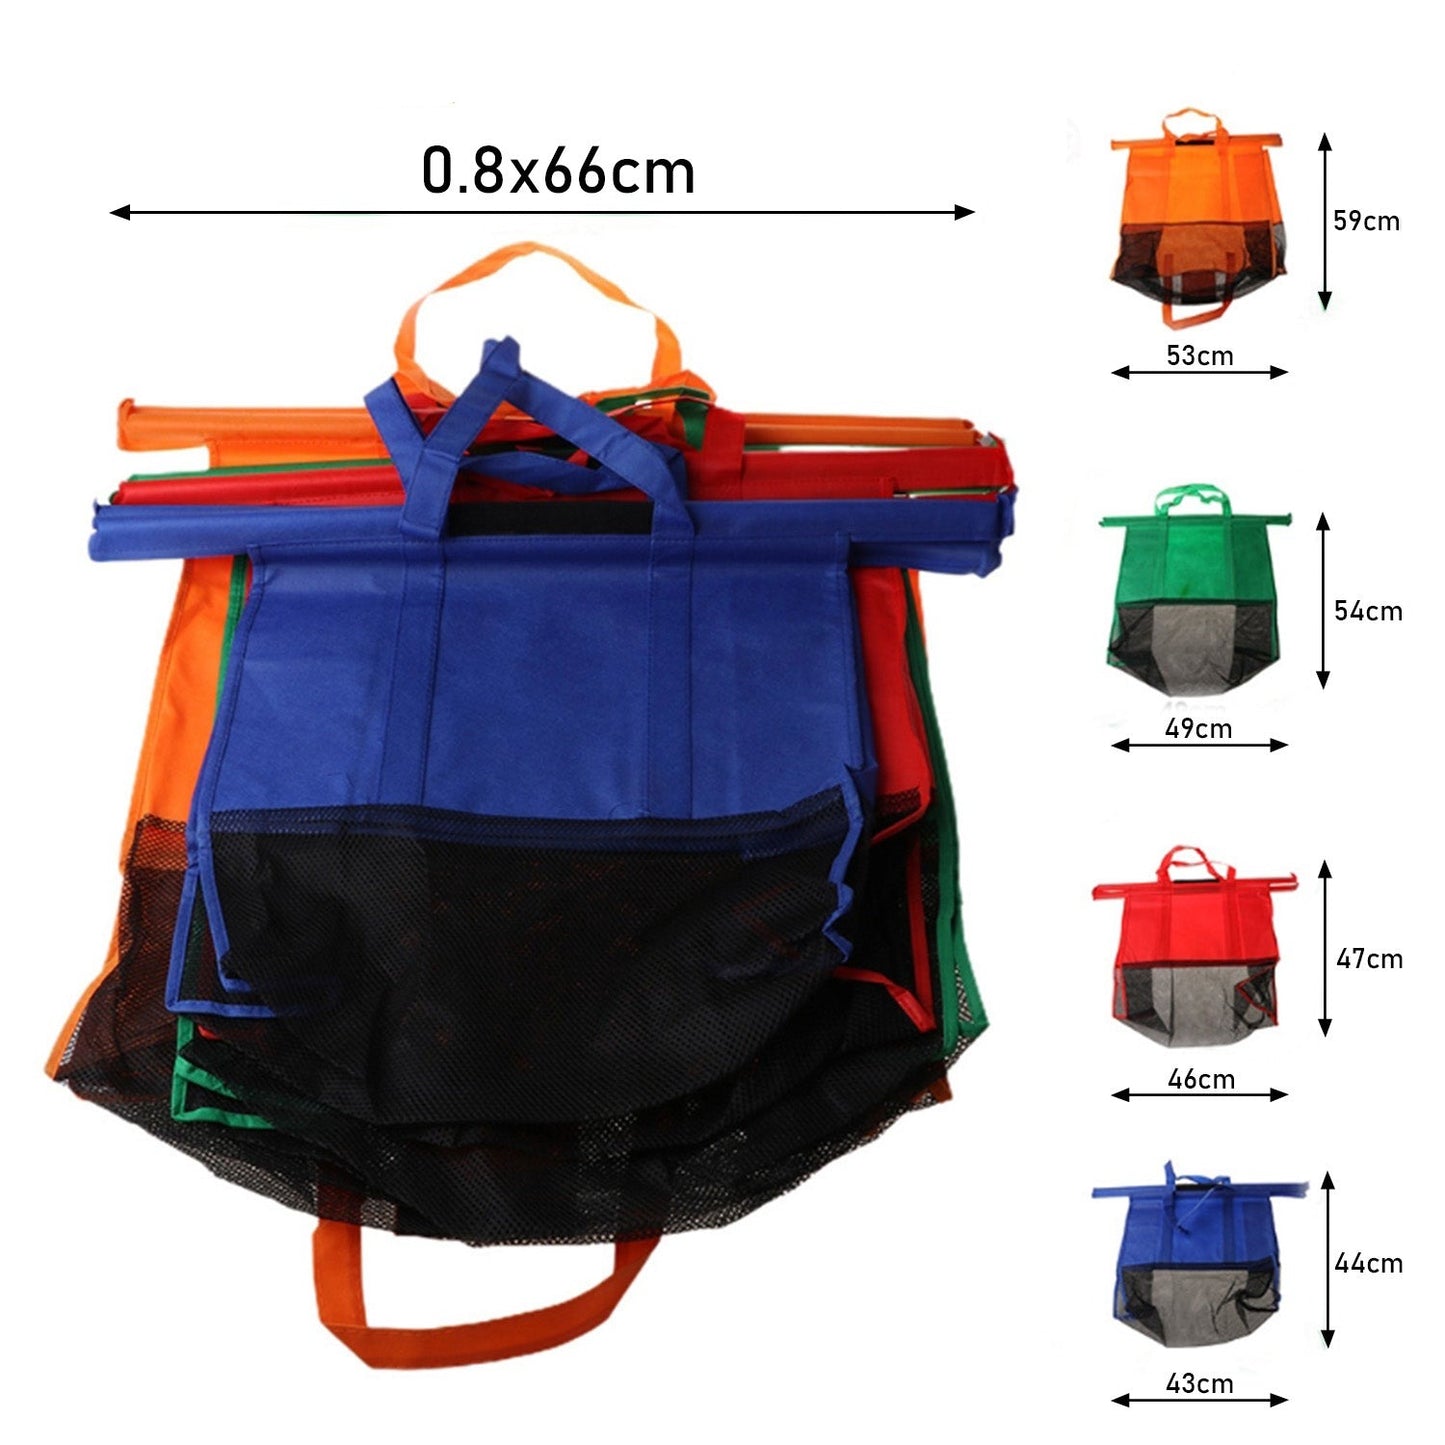 Reusable Shopping Trolley Bags (Set of 4)